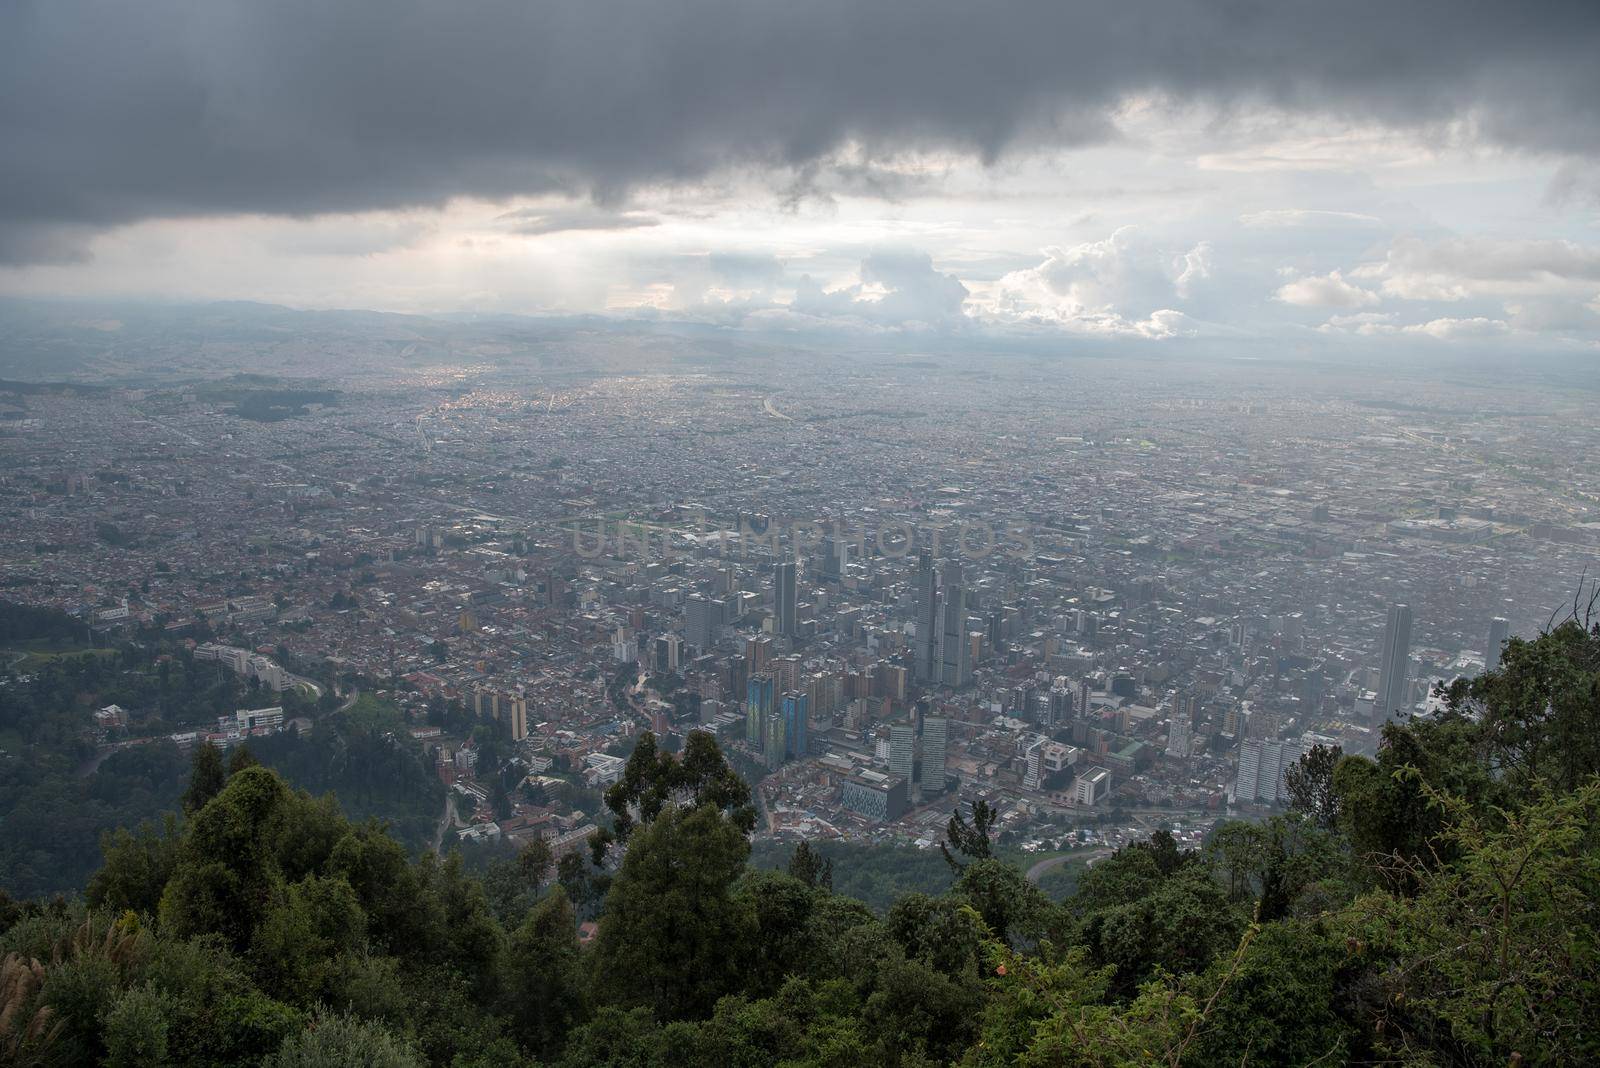 Mount Monserrate in Bogota, Colombia. Storm clouds and skyline. by jyurinko